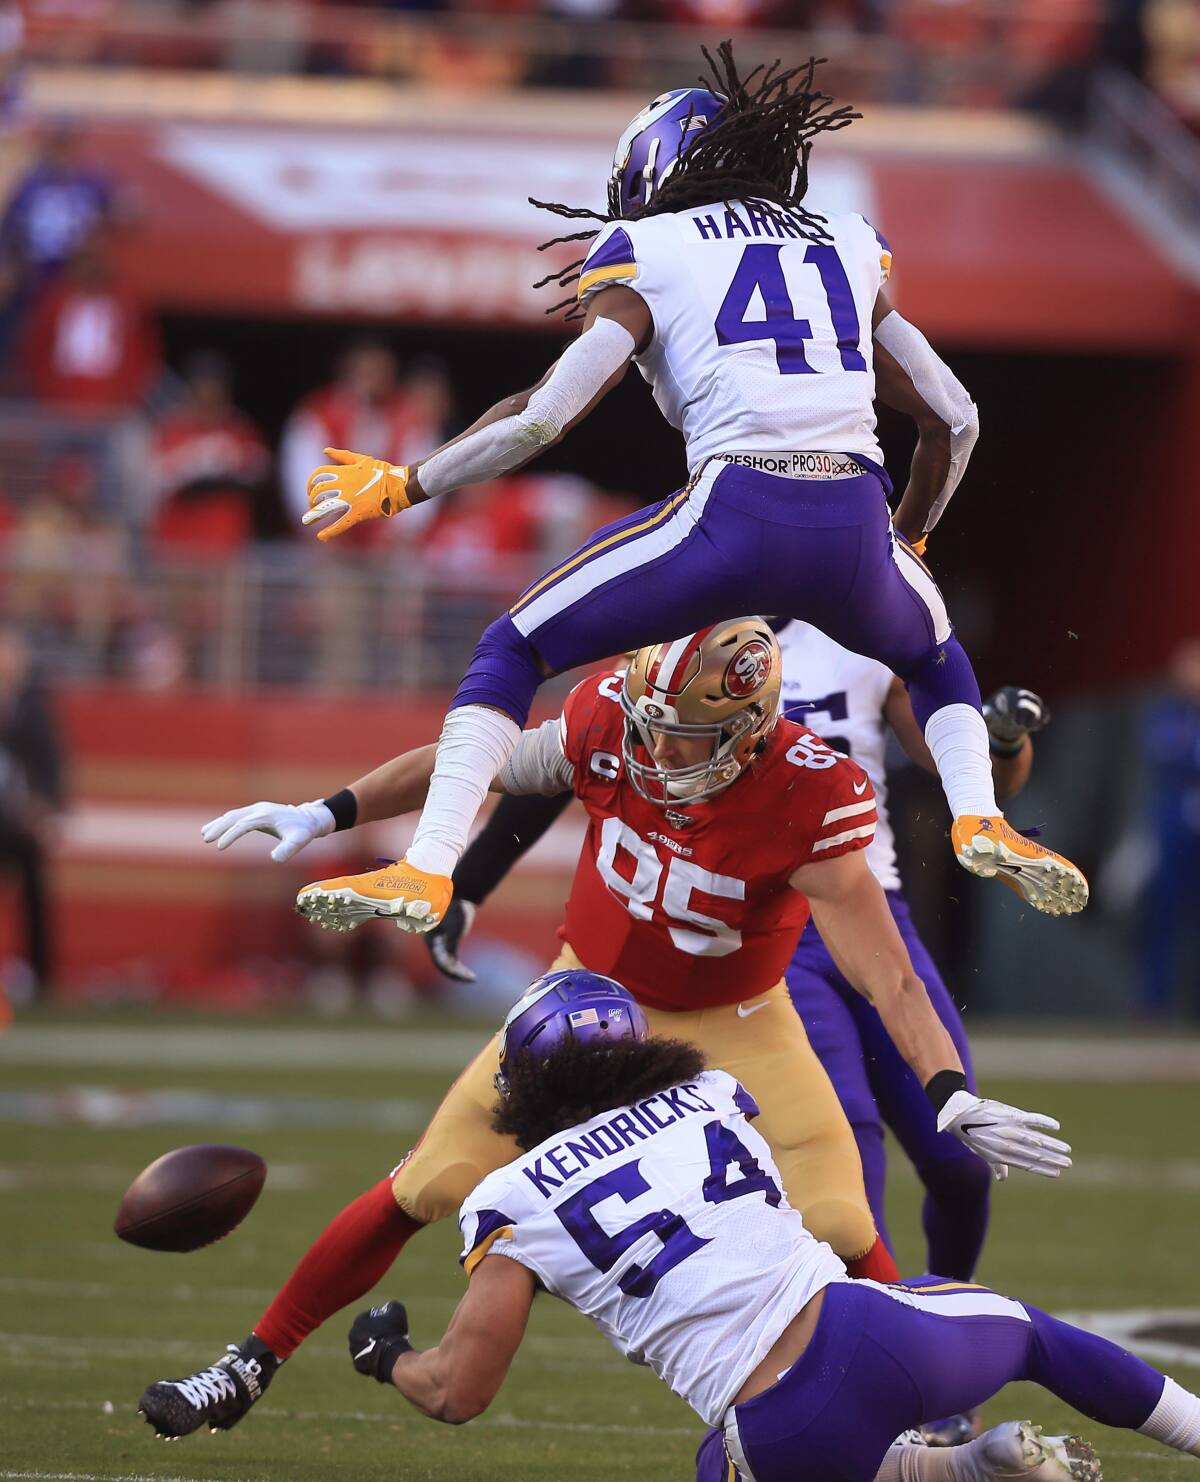 49ers win 1st playoff game in 6 years, 27-10 over Vikings